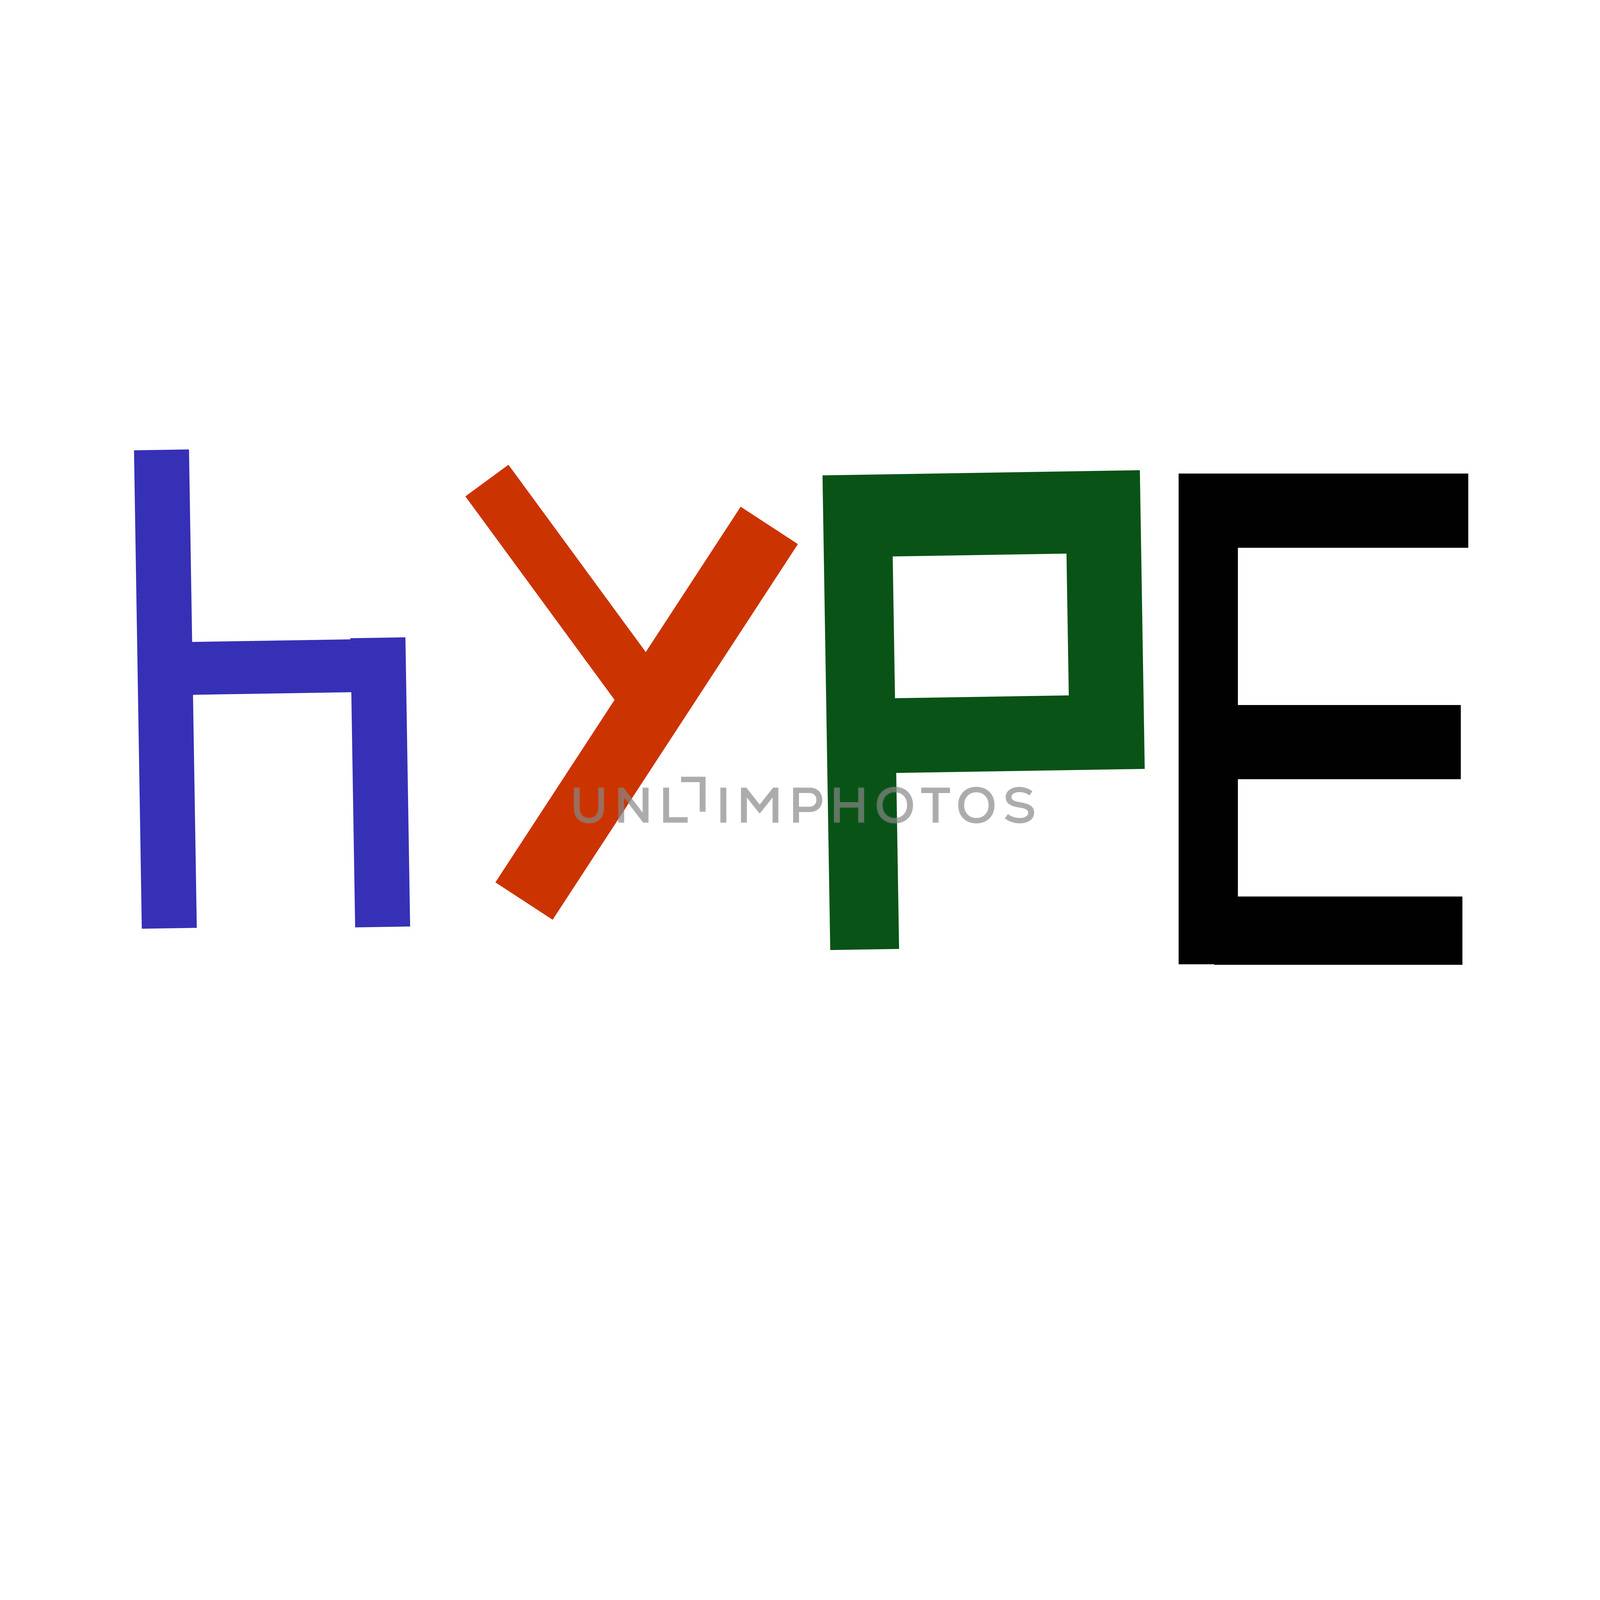 Hype Logo, Logotype, Bright Infographic for Posters, Presentations and Branding, Hype Design for Shirts and Signage, Distressed Icon.